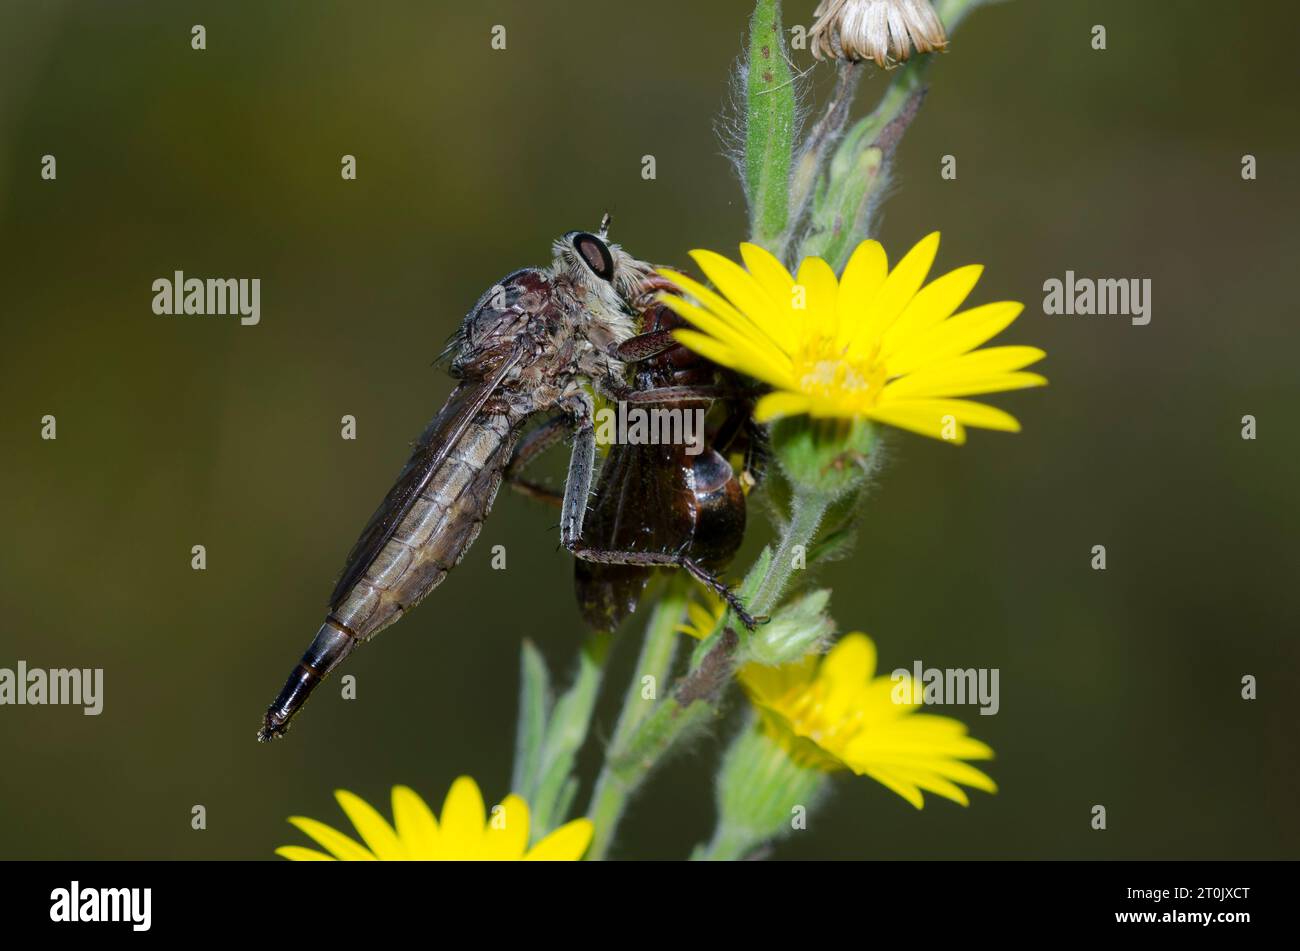 Giant Robber Fly, Promachus sp., female with Paper Wasp, Polistes sp., prey, while perched on Soft Goldenaster, Bradburia pilosa Stock Photo